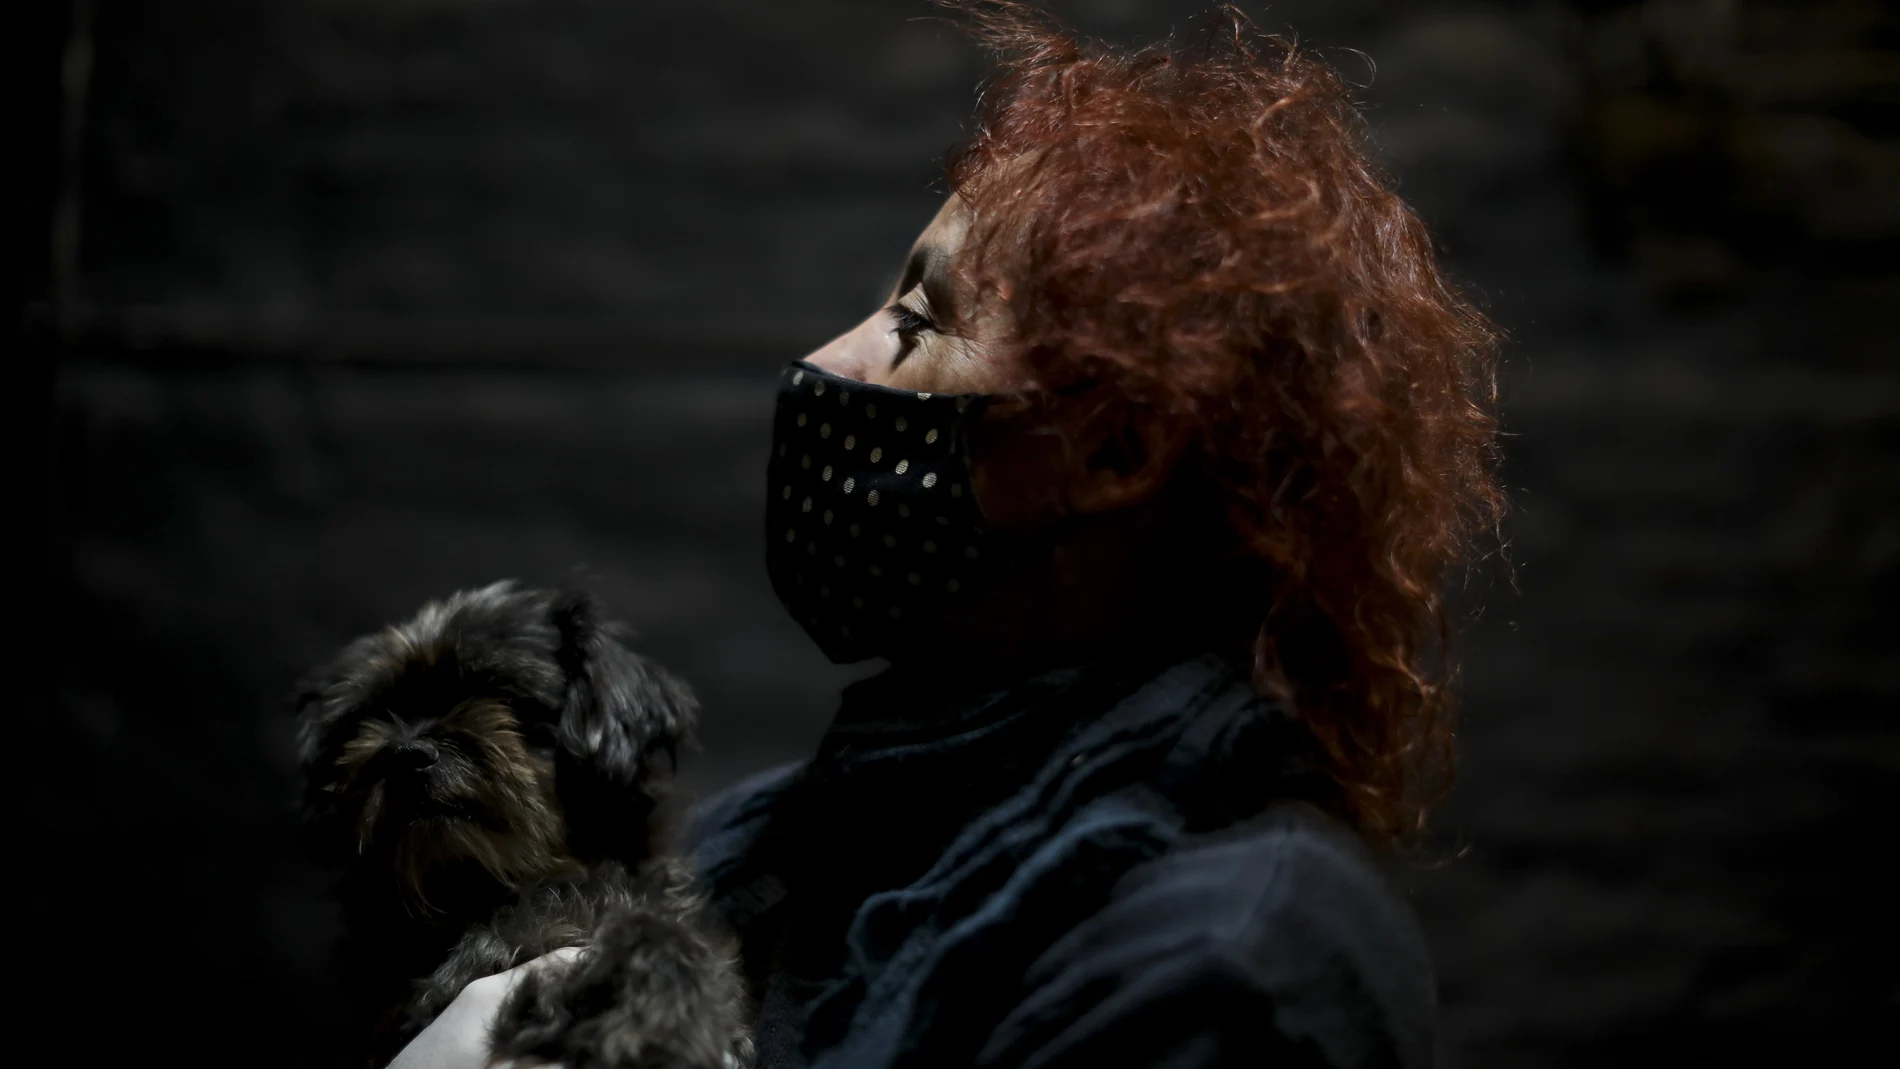 Actor Fabio "Mosquito" Sancineto poses with her dog for a portrait inside a closed theater in Buenos Aires, Argentina, Saturday, May 16, 2020. Sancineto is the promoter of Solidarity Artists, an initiative to help fellow artists struggling to eat and pay bills after months without work after hundreds of theaters were closed by the mandatory lockdown to stop the spread of the new coronavirus. (AP Photo/Natacha Pisarenko)